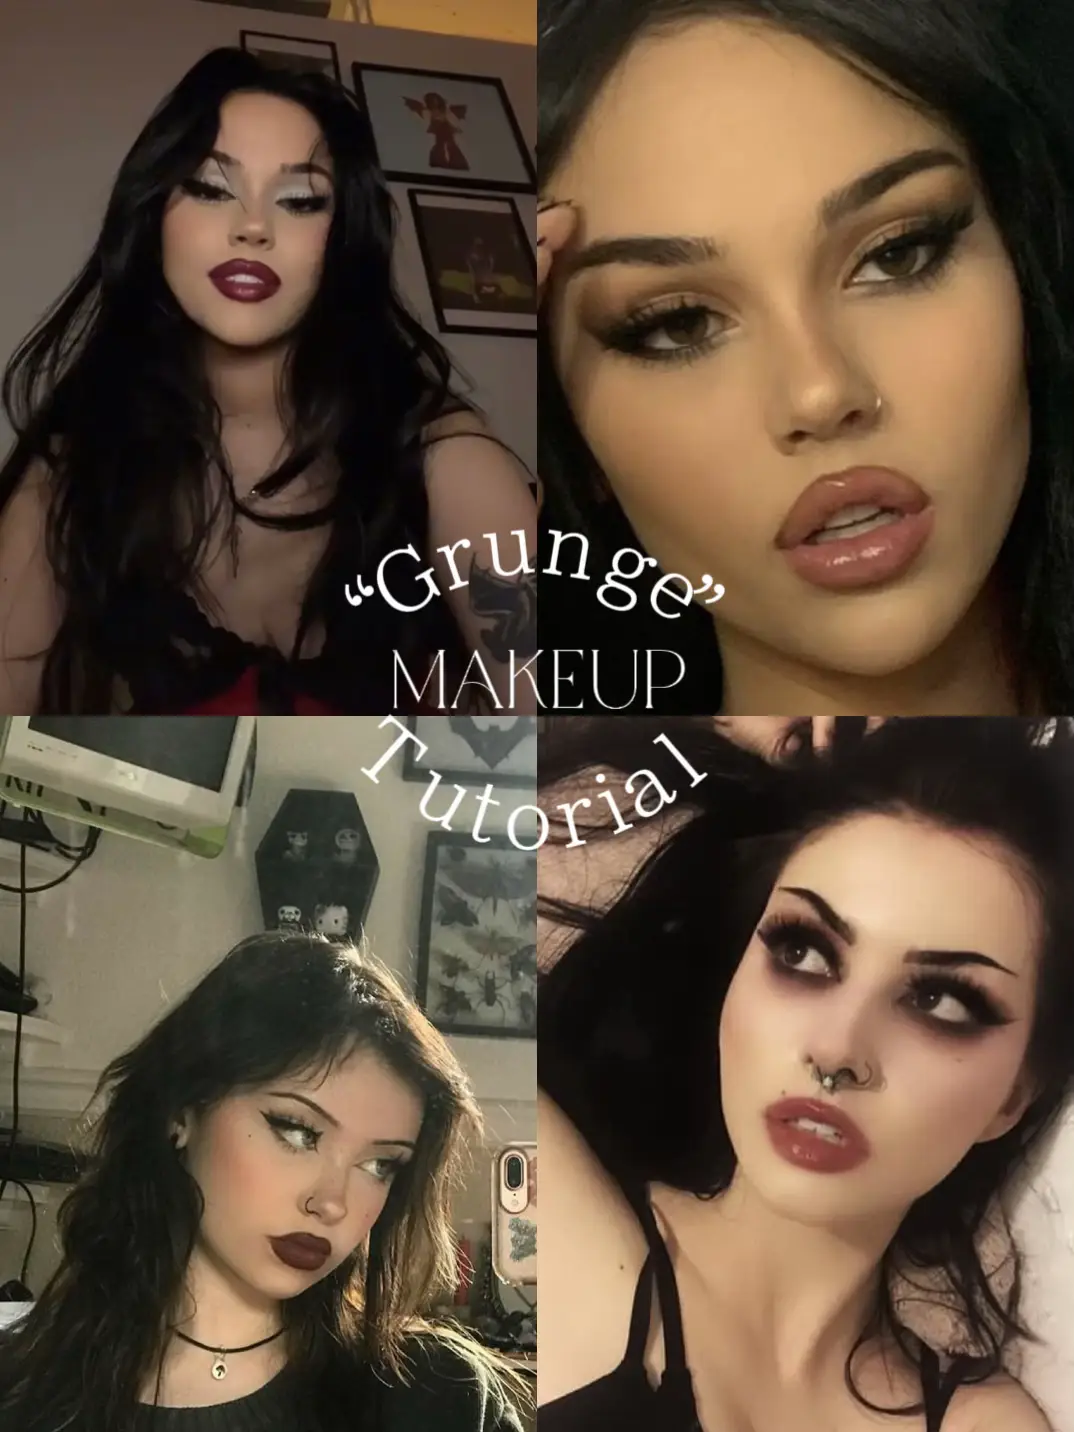 Grunge Makeup Gallery Posted By Me